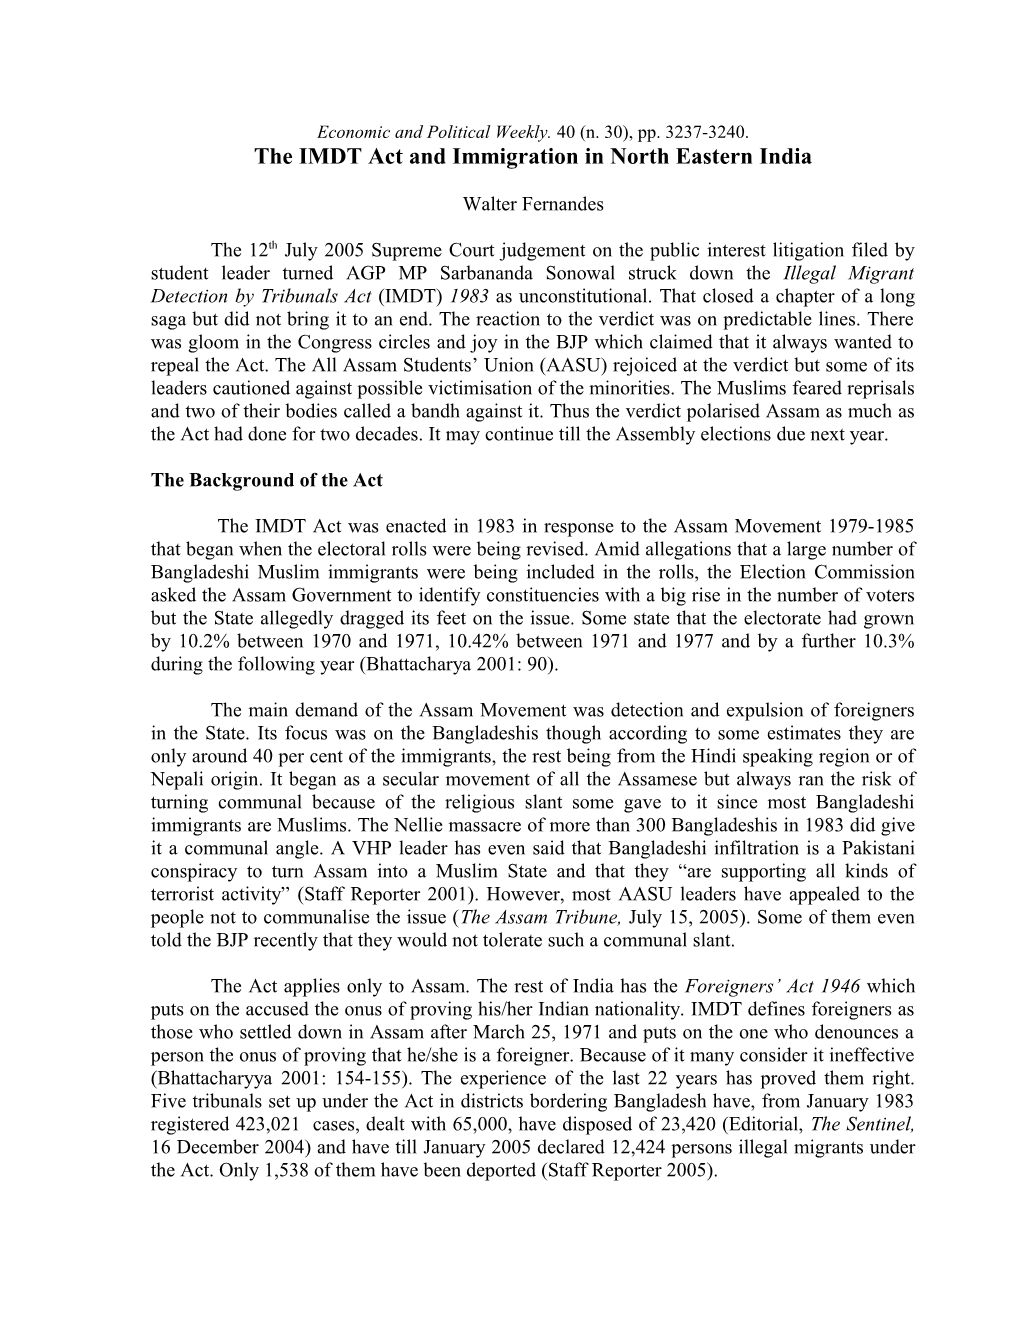 The IMDT Act and Immigration in North Eastern India